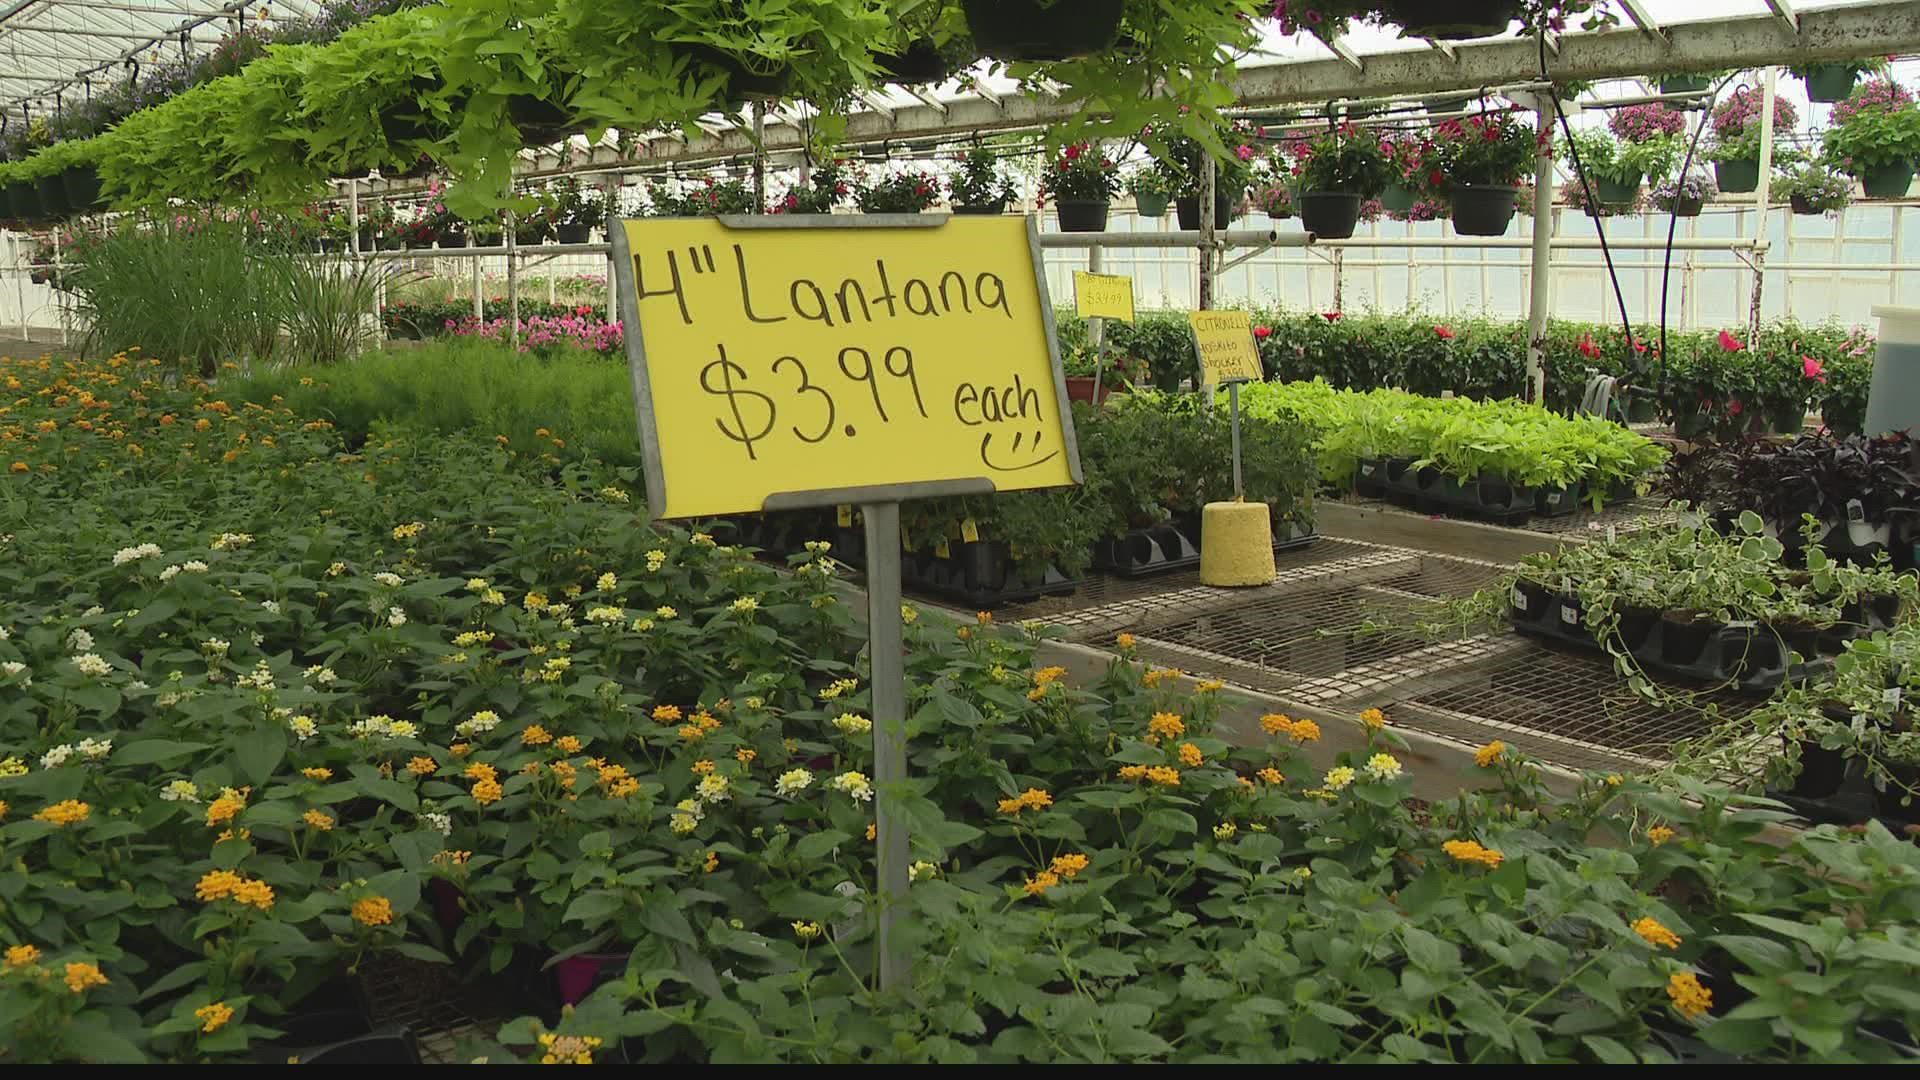 Bayer's Garden Shop has been a family-owned business for 81 years, spanning three generations.